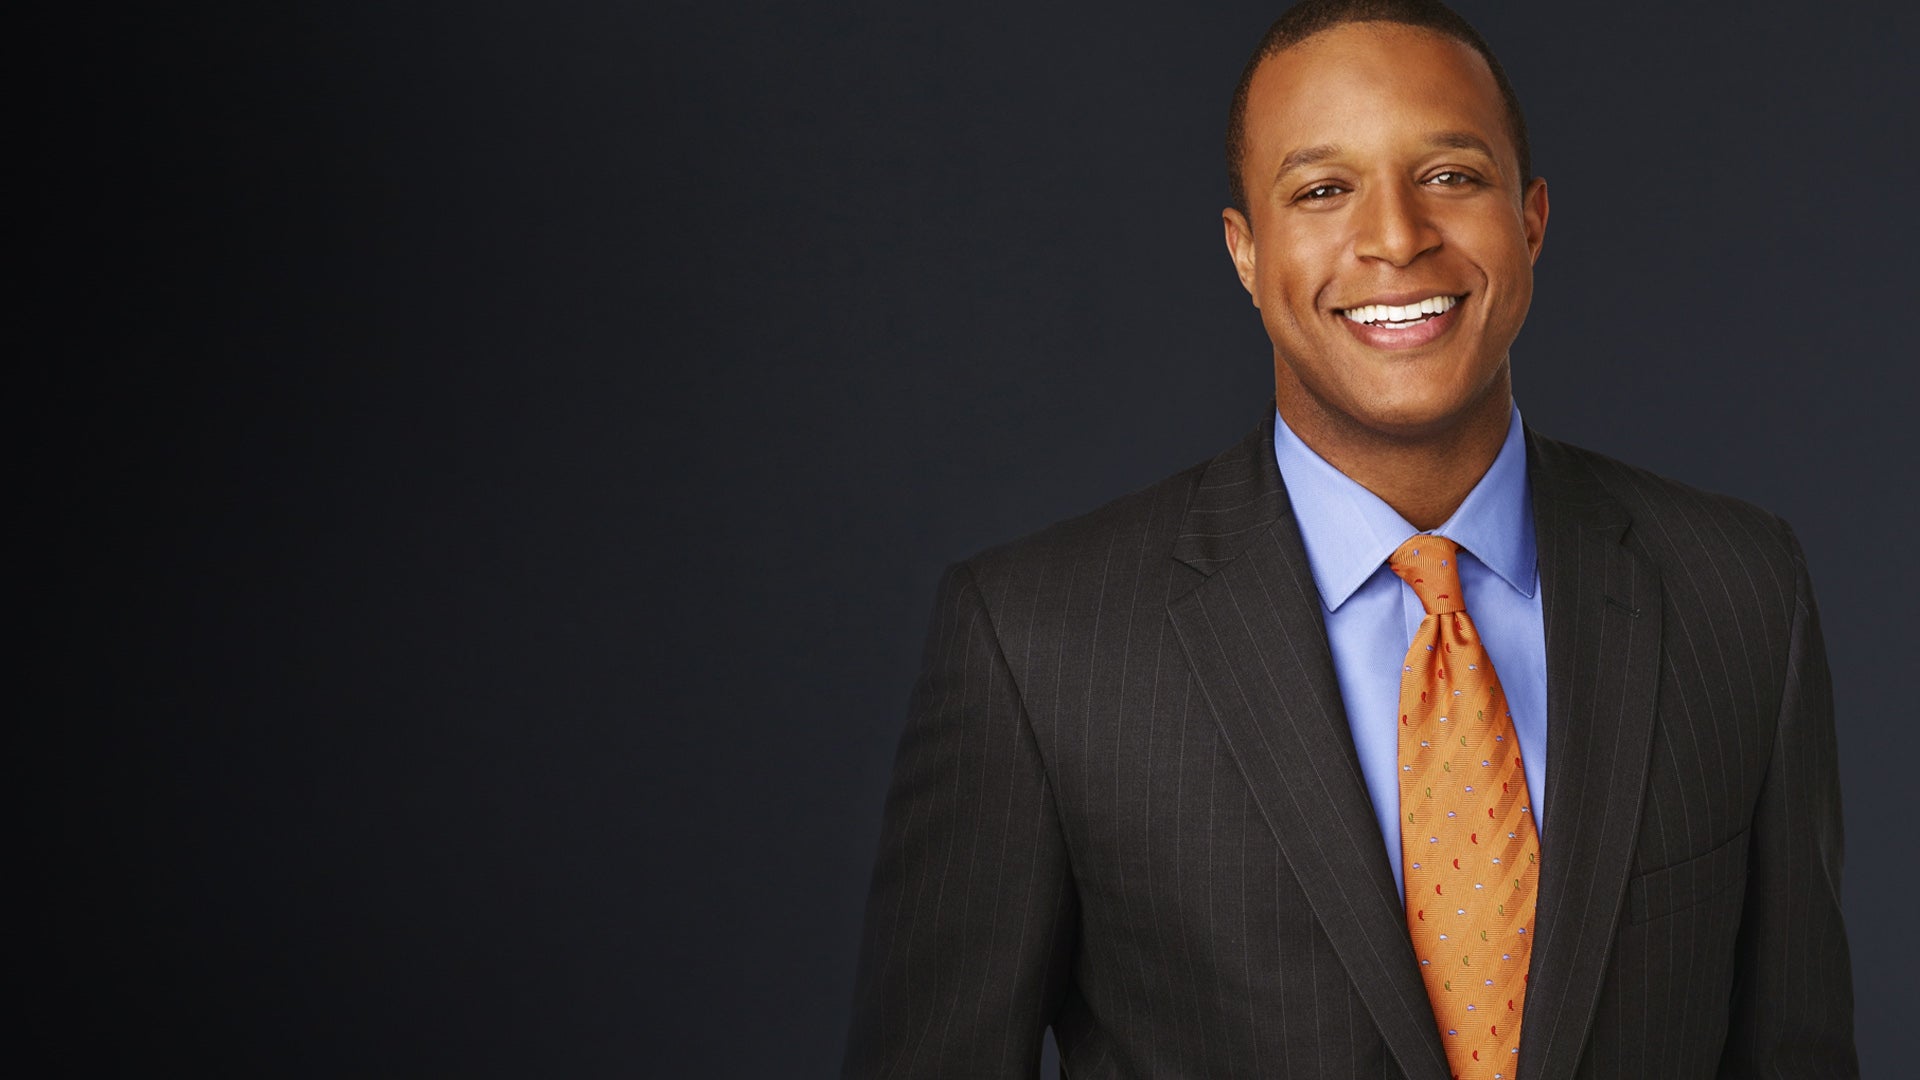 “Today Show” Host Craig Melvin on How His Faith Has Helped Him Navigate Big-Time Life